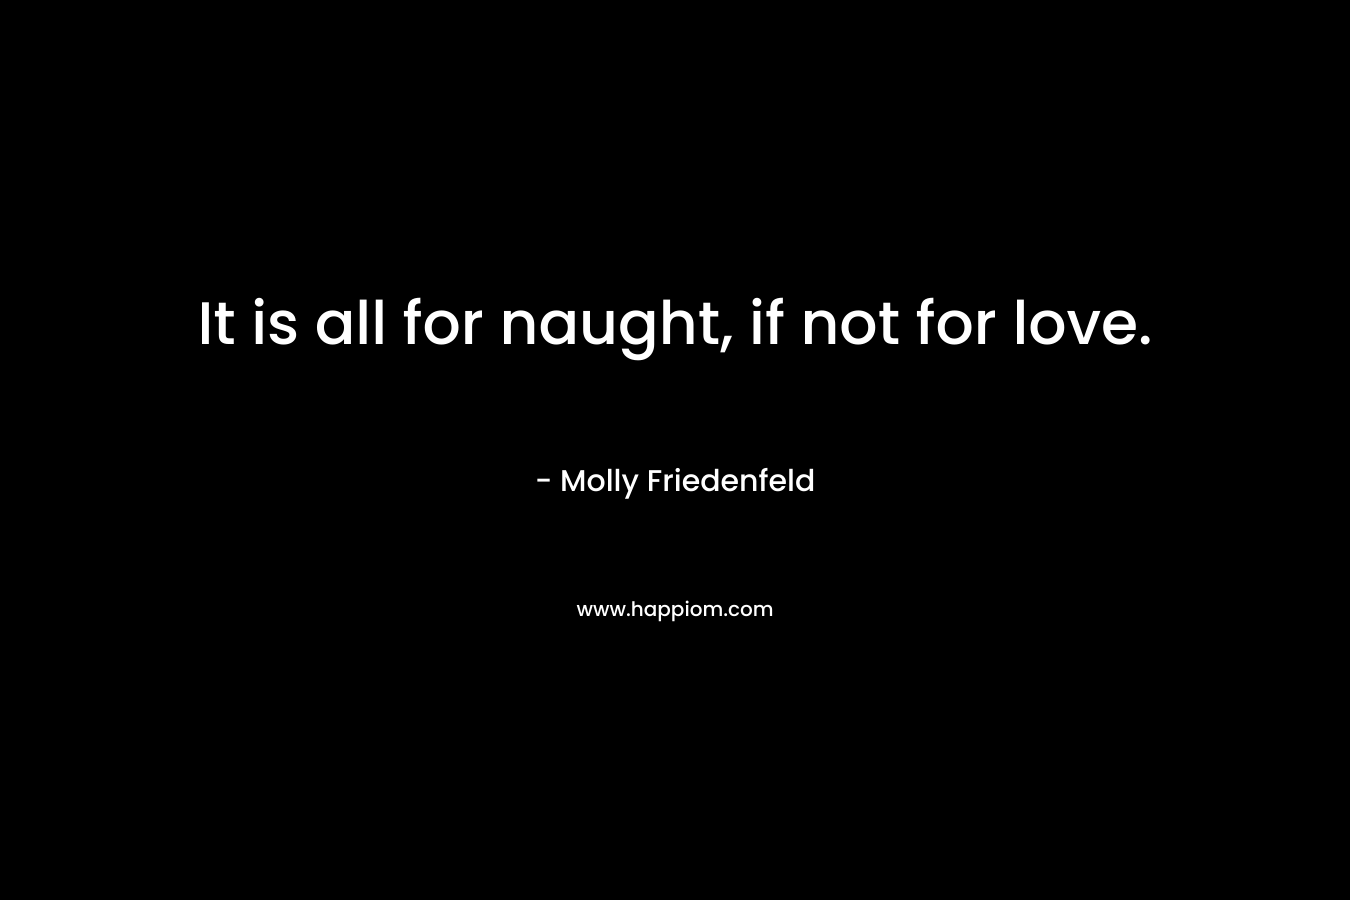 It is all for naught, if not for love. – Molly Friedenfeld